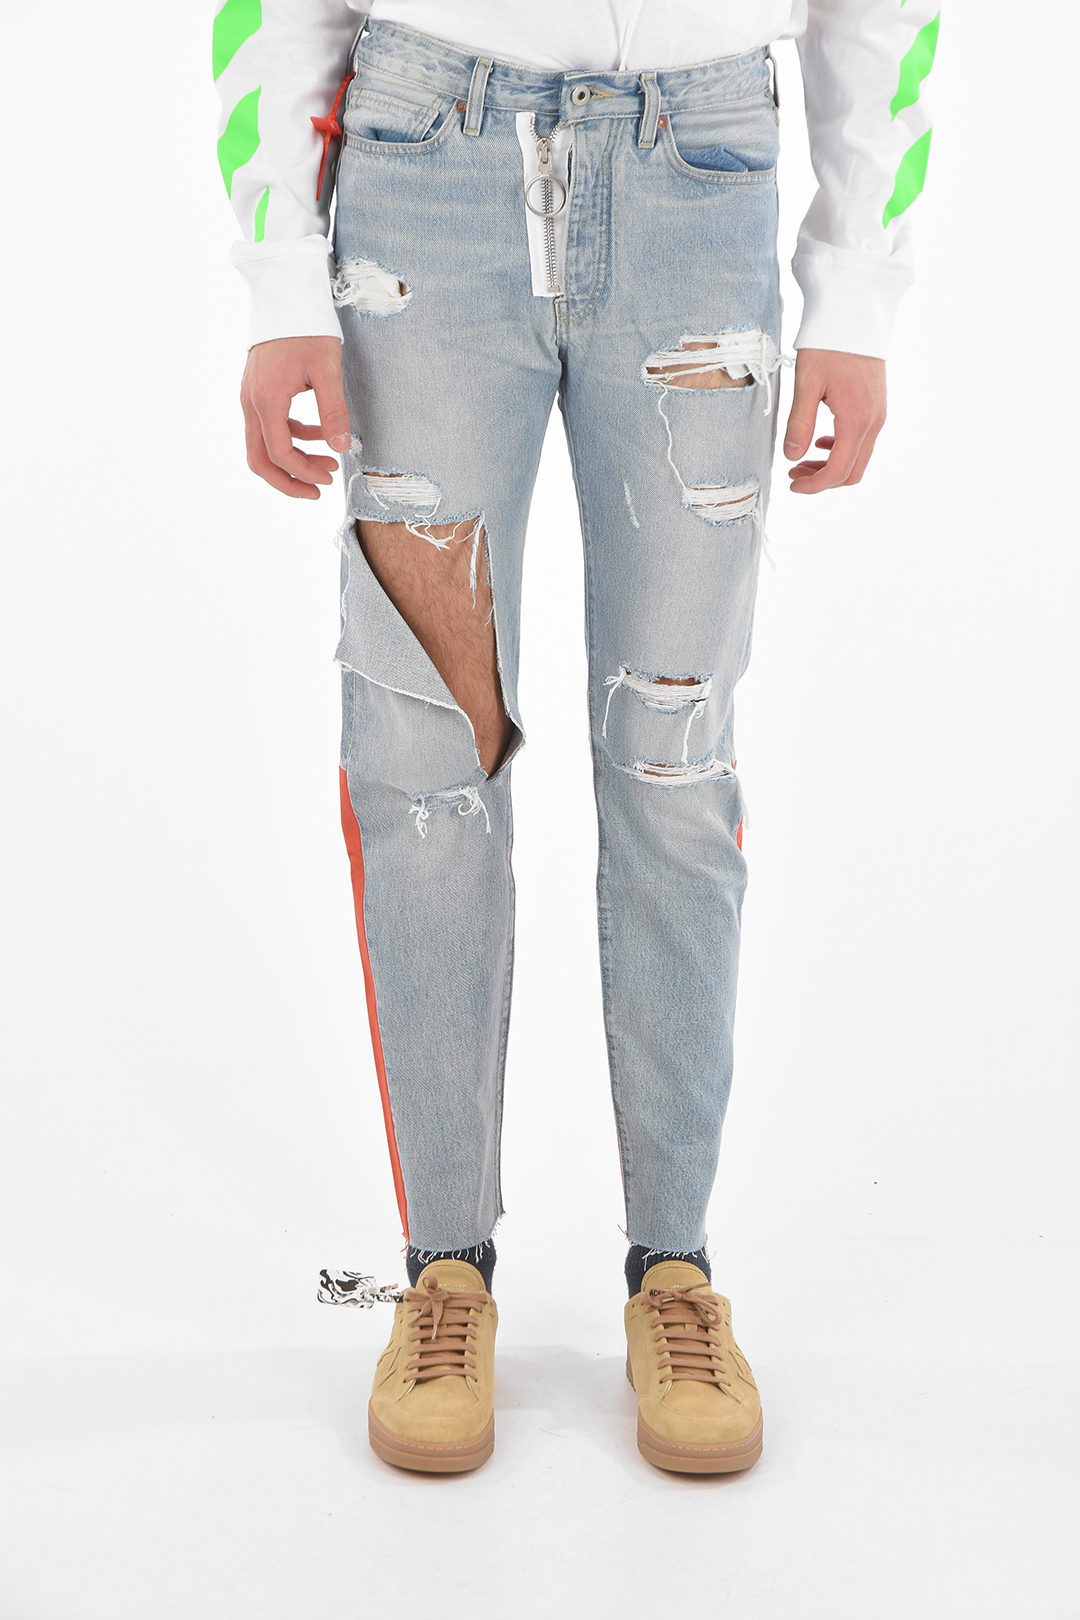 Off-White LEVI'S Distressed Skinny Jeans with Contrasting Patches 18cm men  - Glamood Outlet